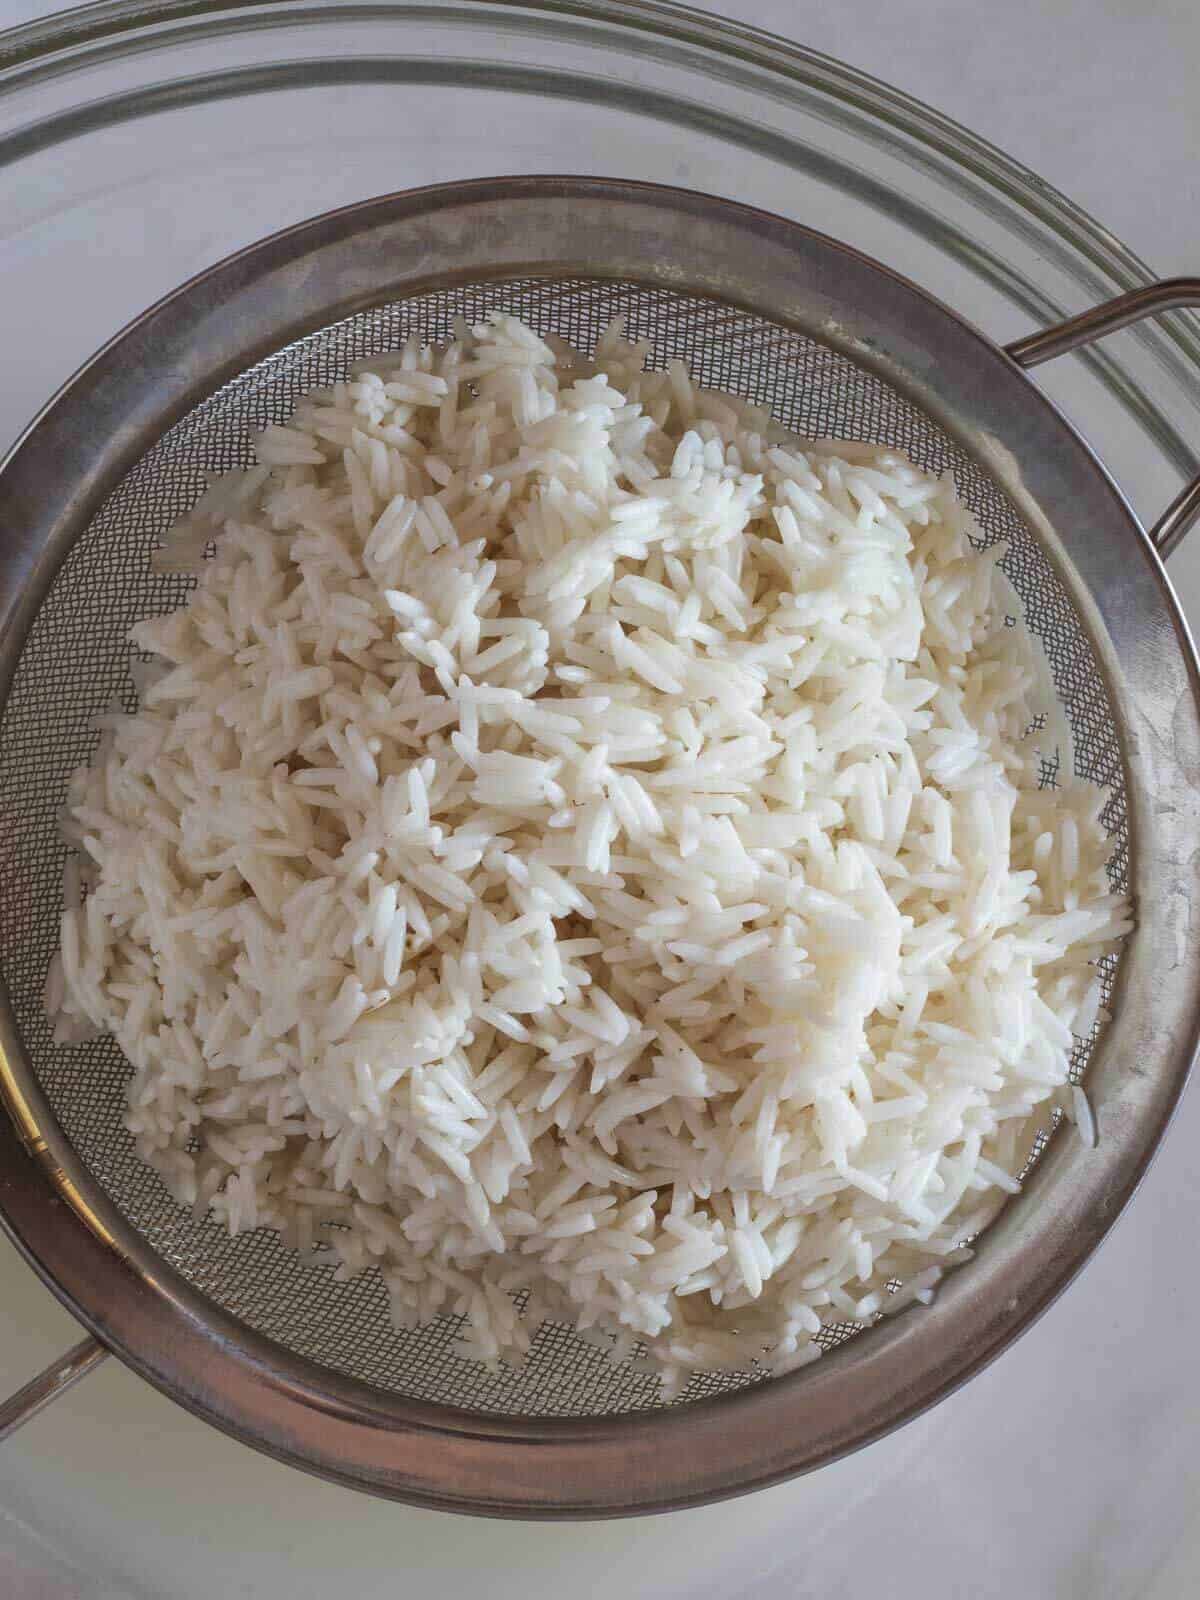 drain the rice to remove the excess starch